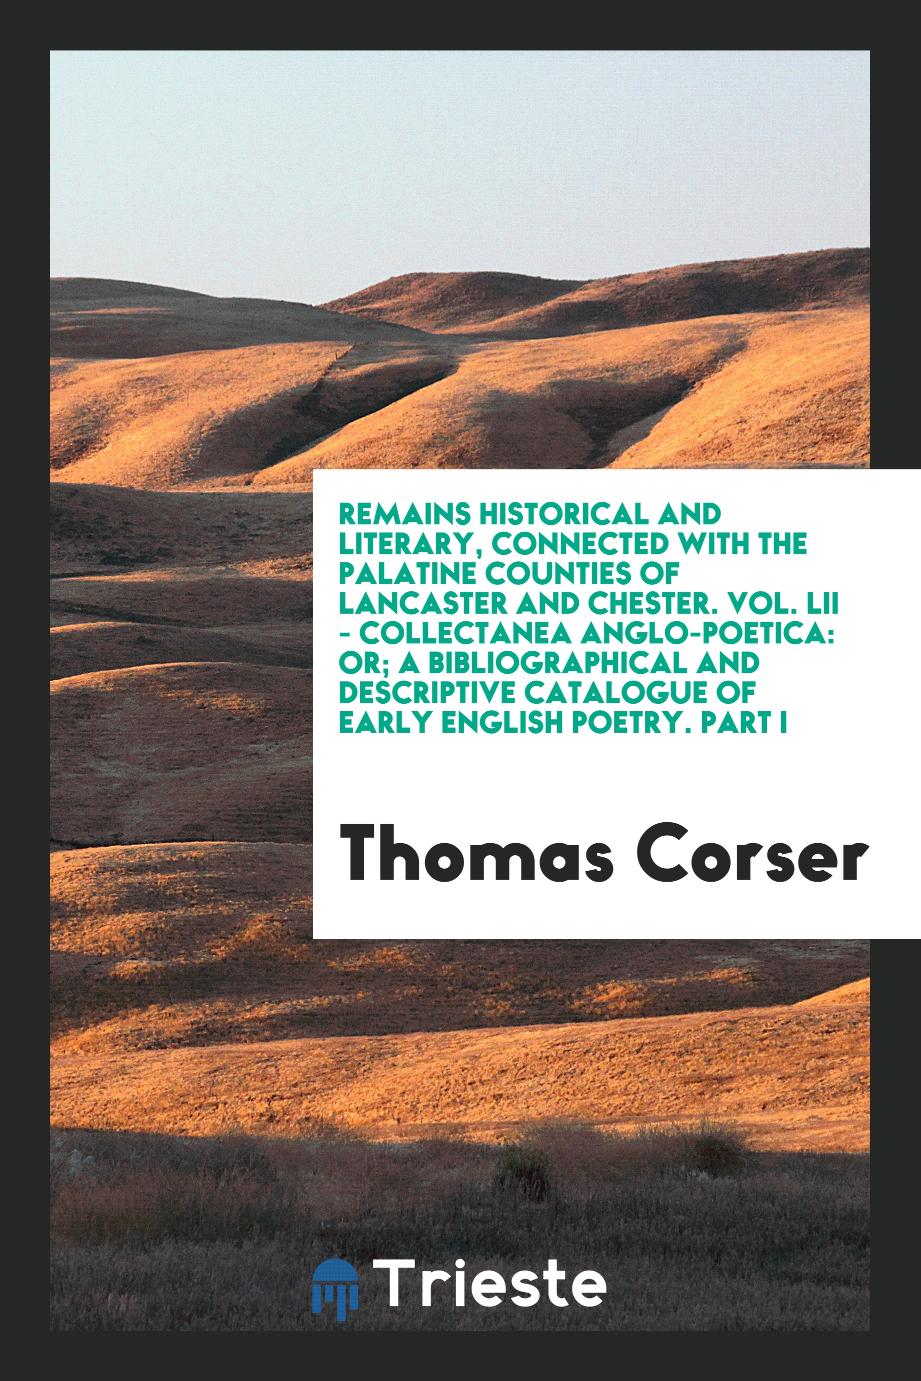 Remains Historical and Literary, Connected with the Palatine Counties of Lancaster and Chester. Vol. LII - Collectanea Anglo-Poetica: Or; A Bibliographical and Descriptive Catalogue of Early English Poetry. Part I